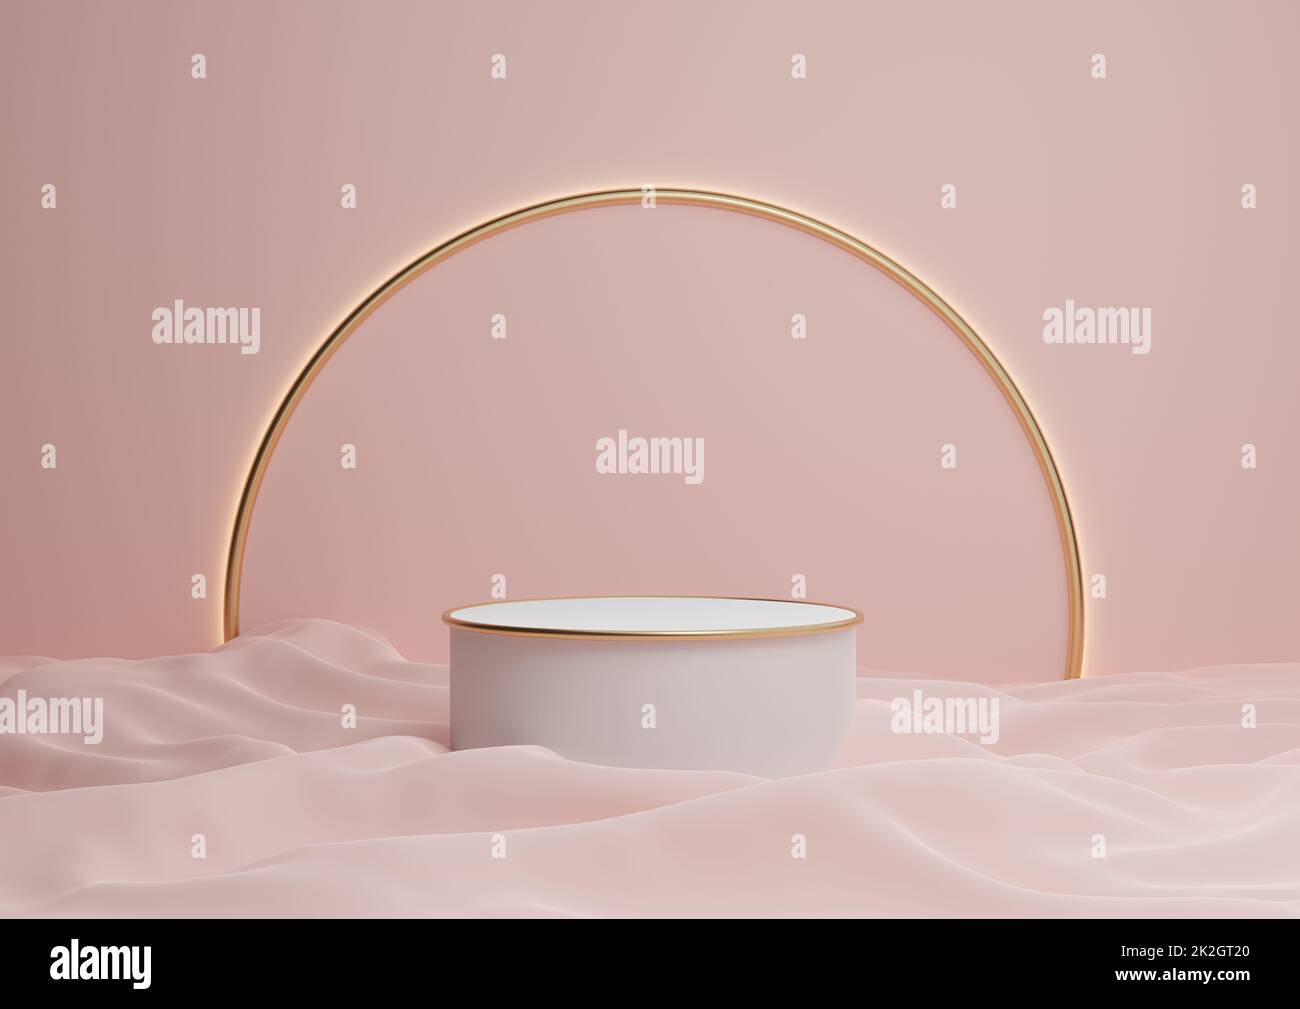 Pastel, light red, salmon pink 3D rendering luxurious product display podium or stand minimal composition with golden arch line in background and light Stock Photo